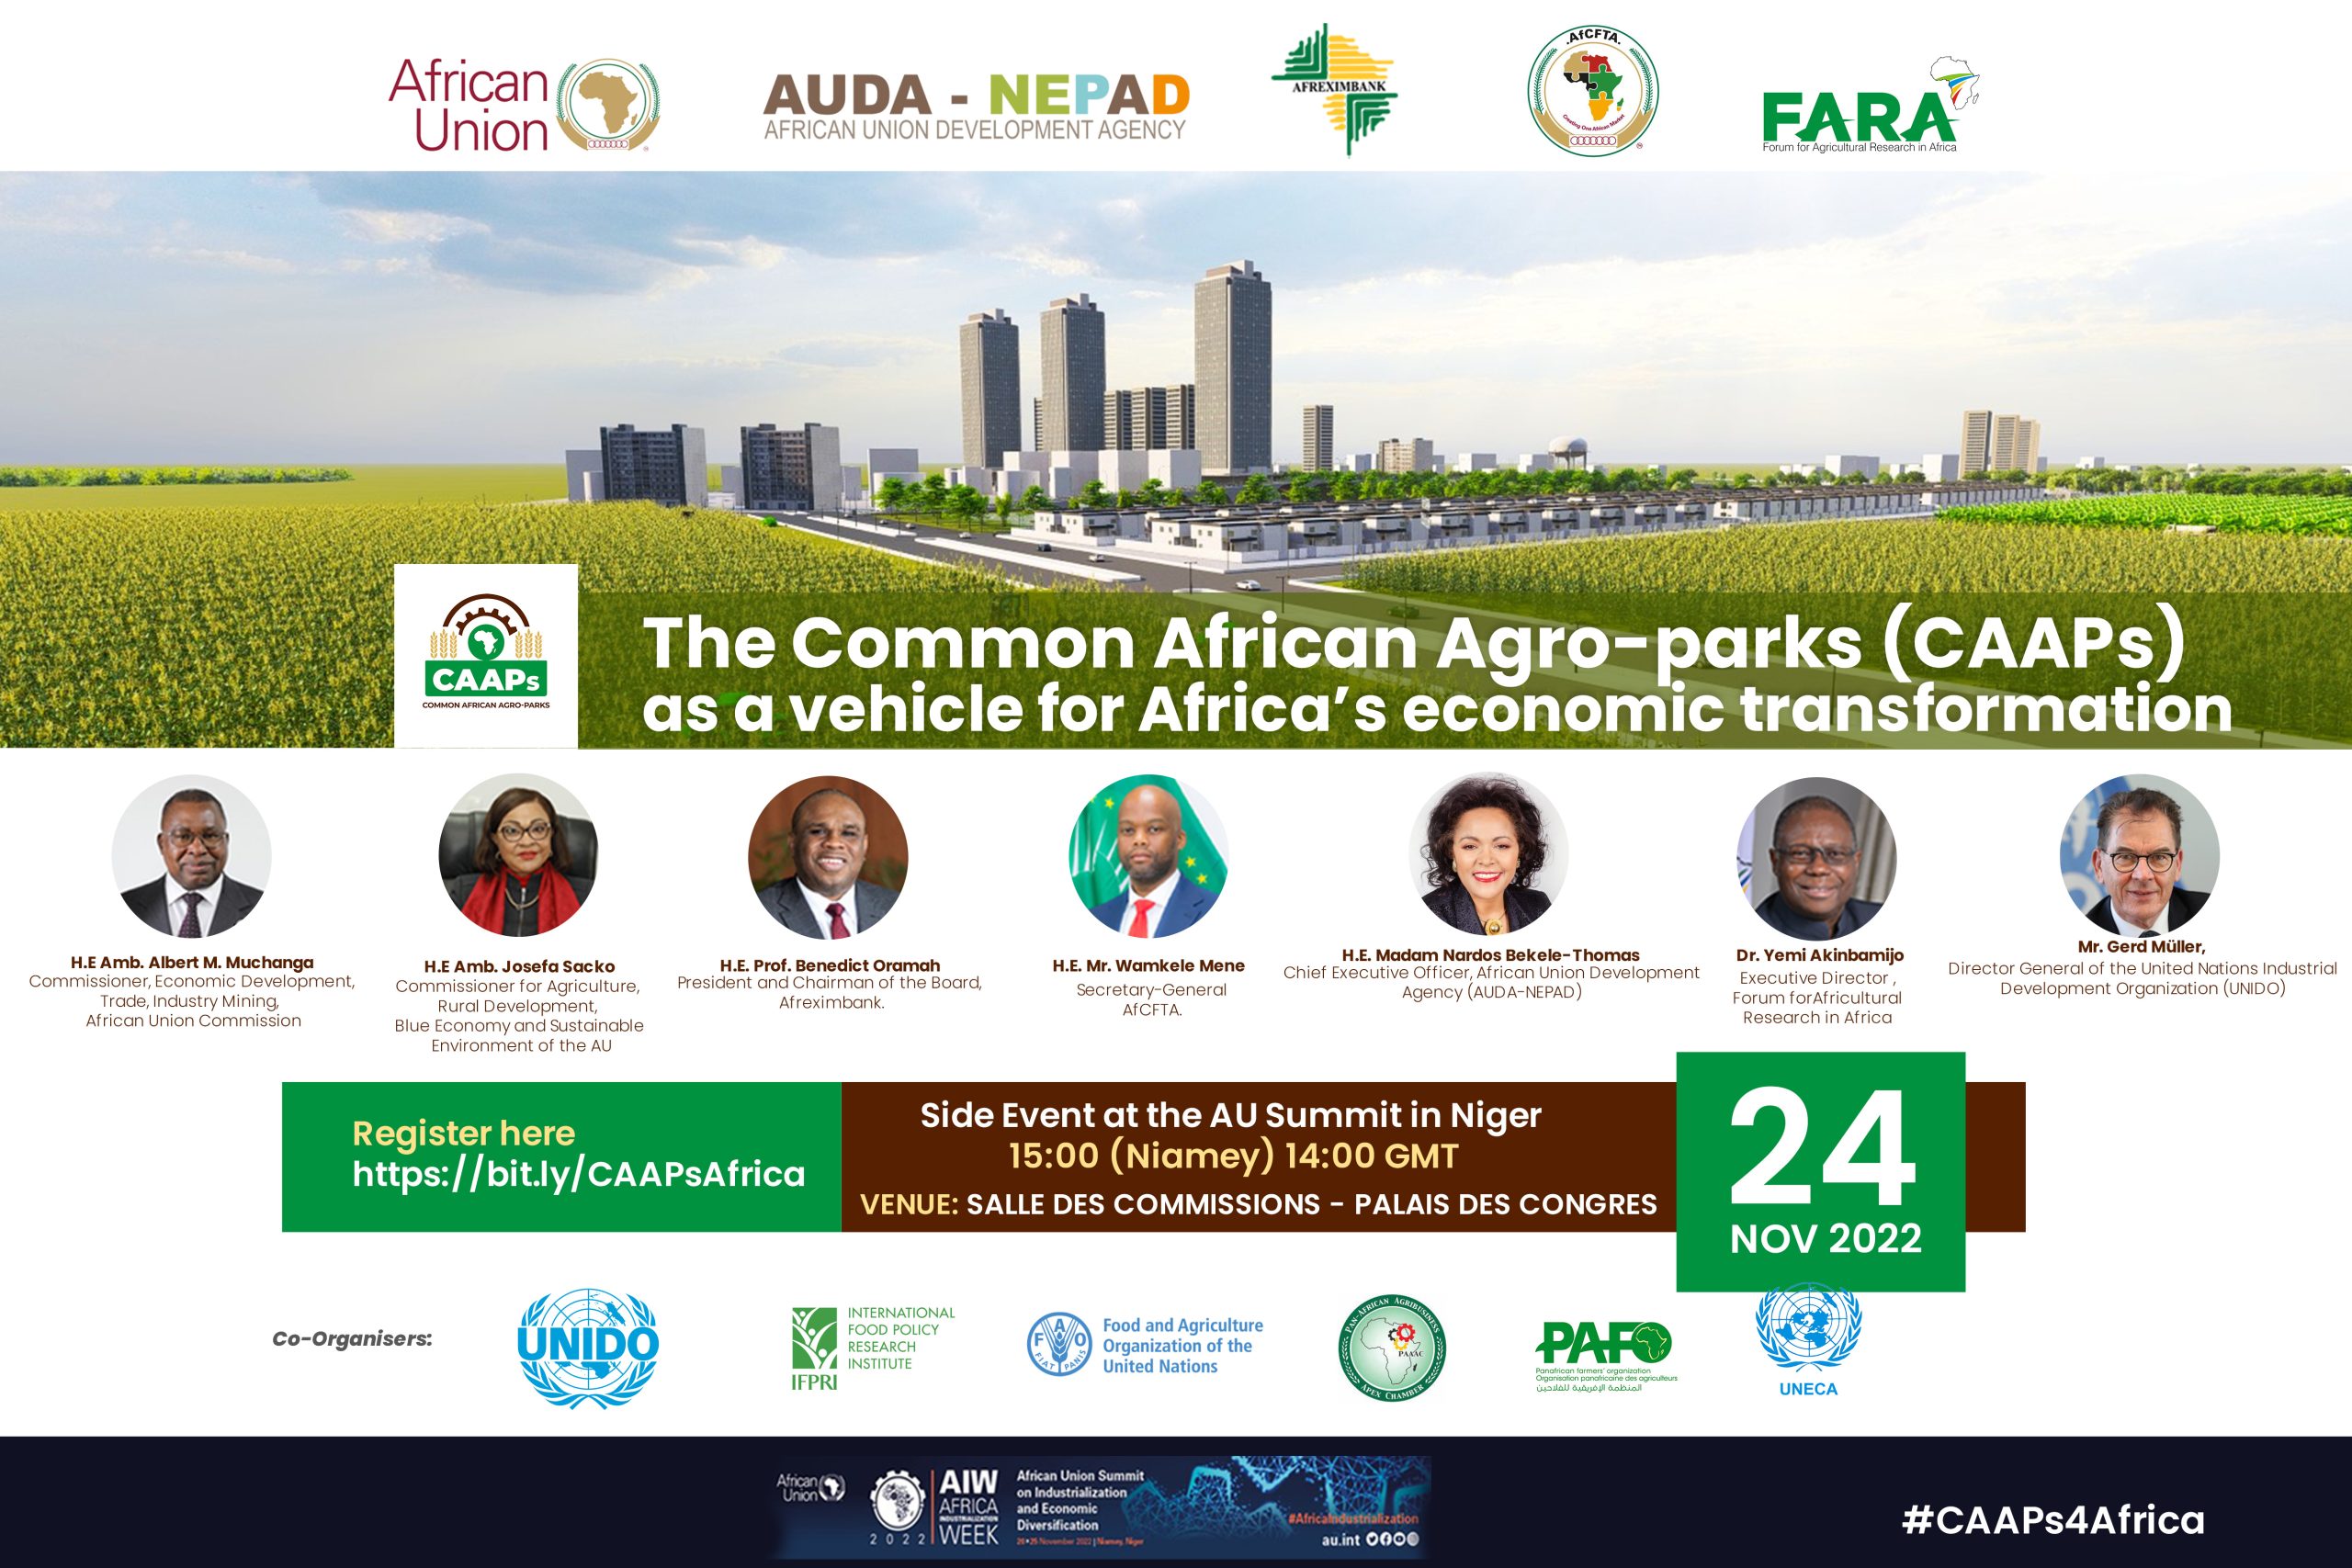 The Common African Agro-parks (CAAPs) as vehicle for Africa’s Economic Transformation